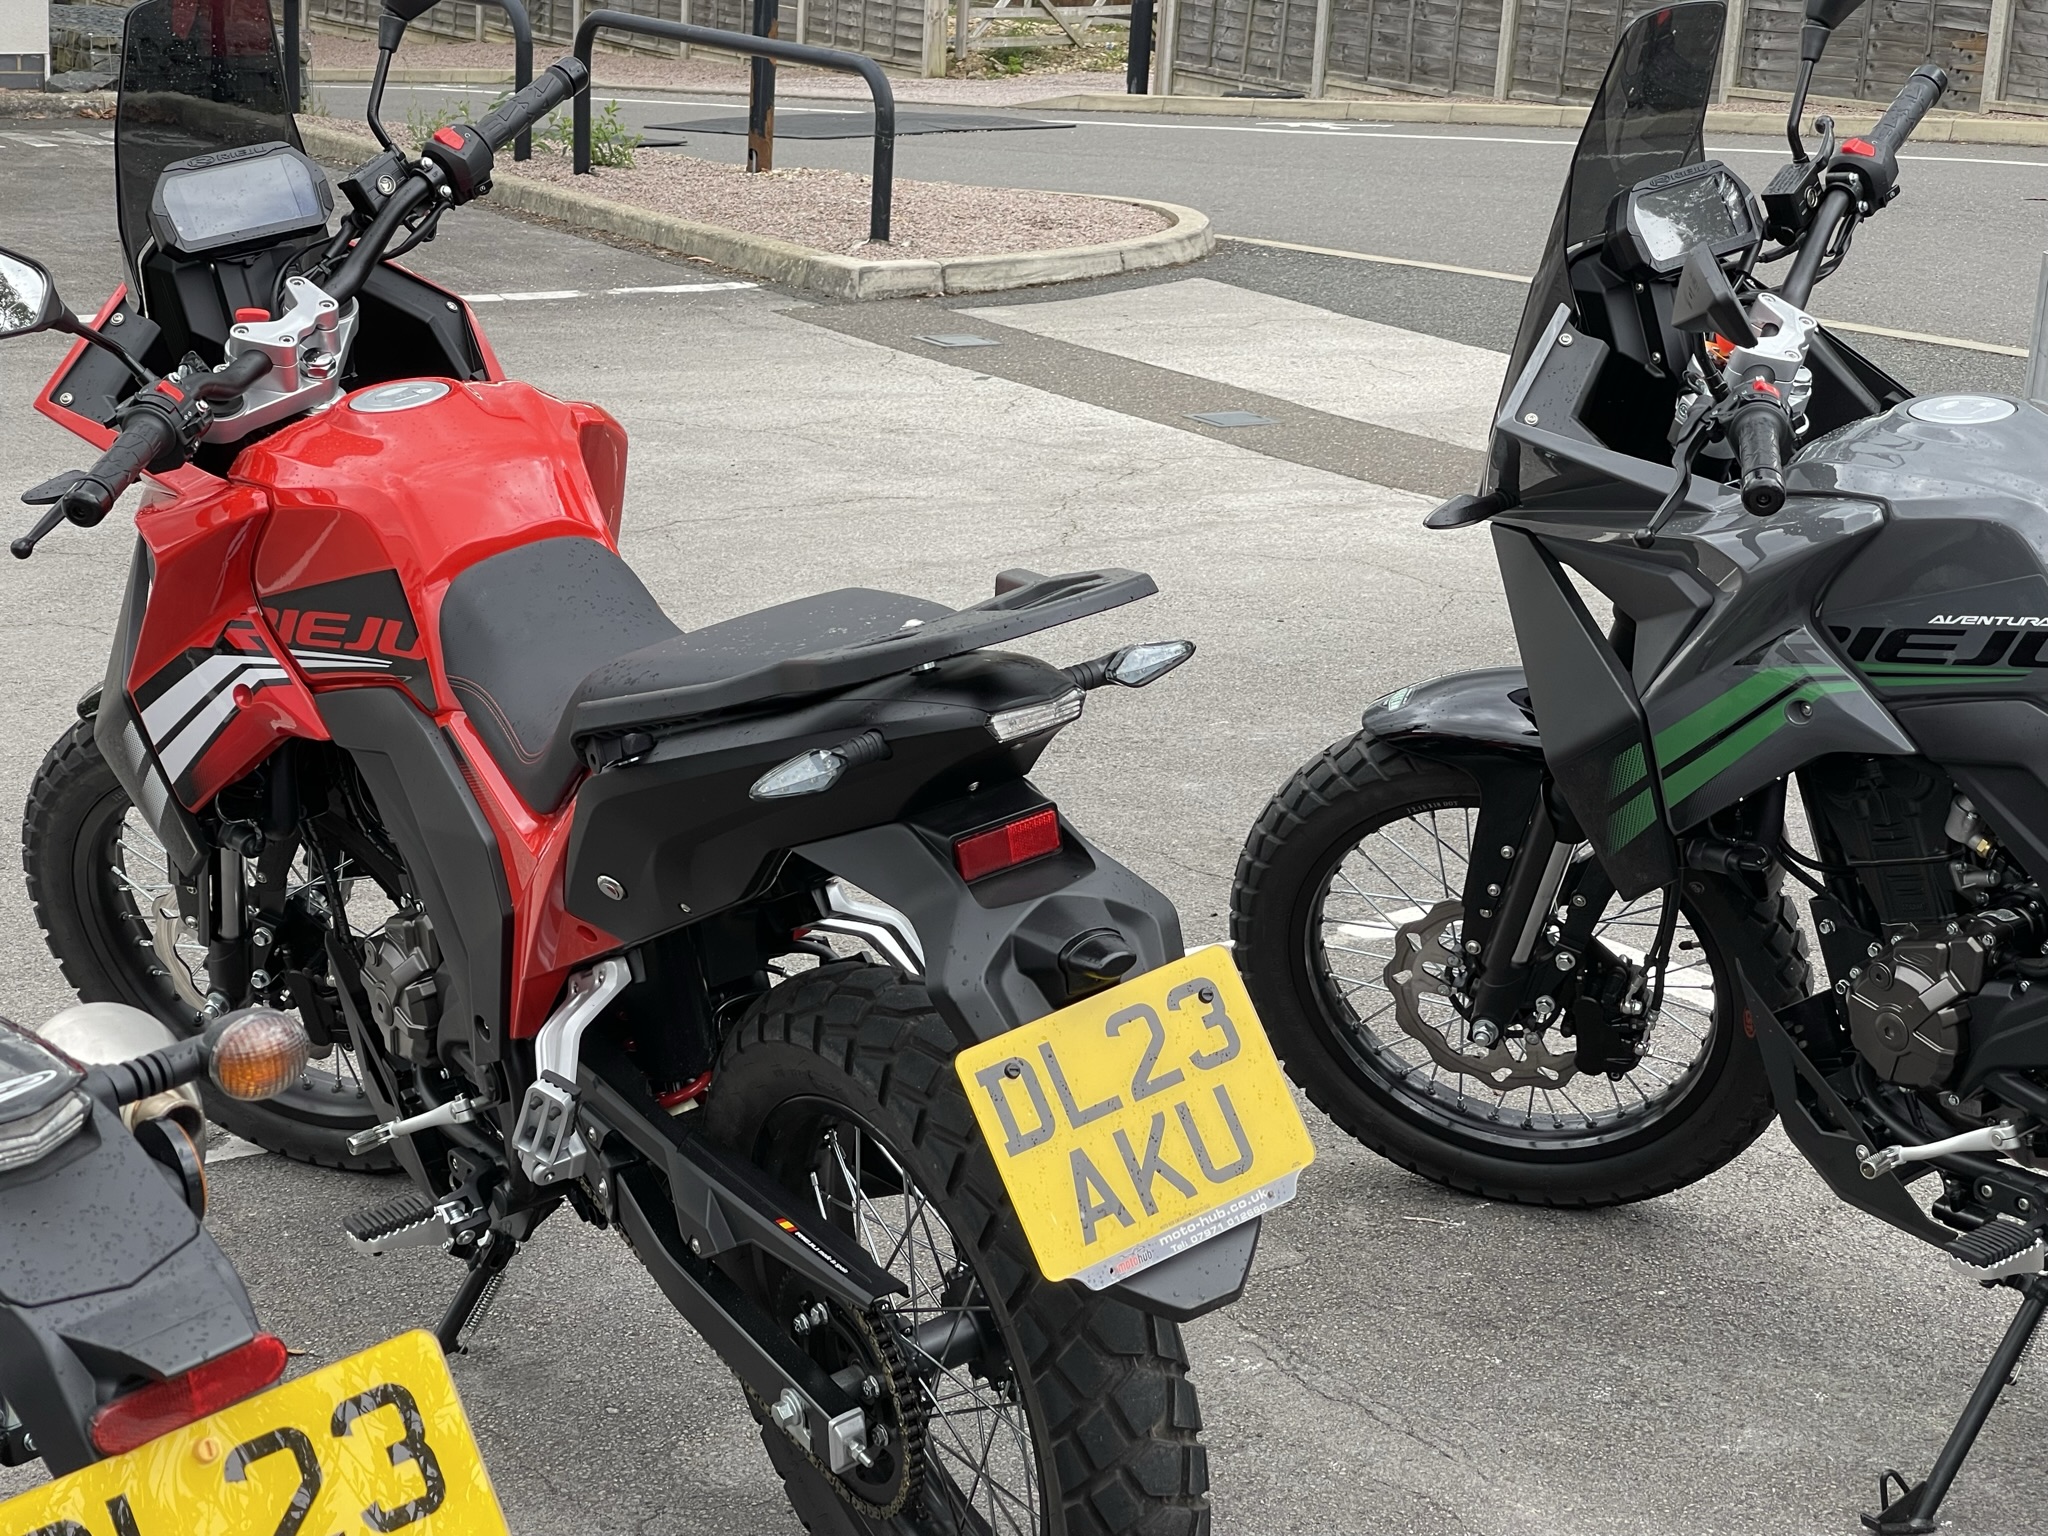 Rieju Aventura 125 in red and grey and green from the rear